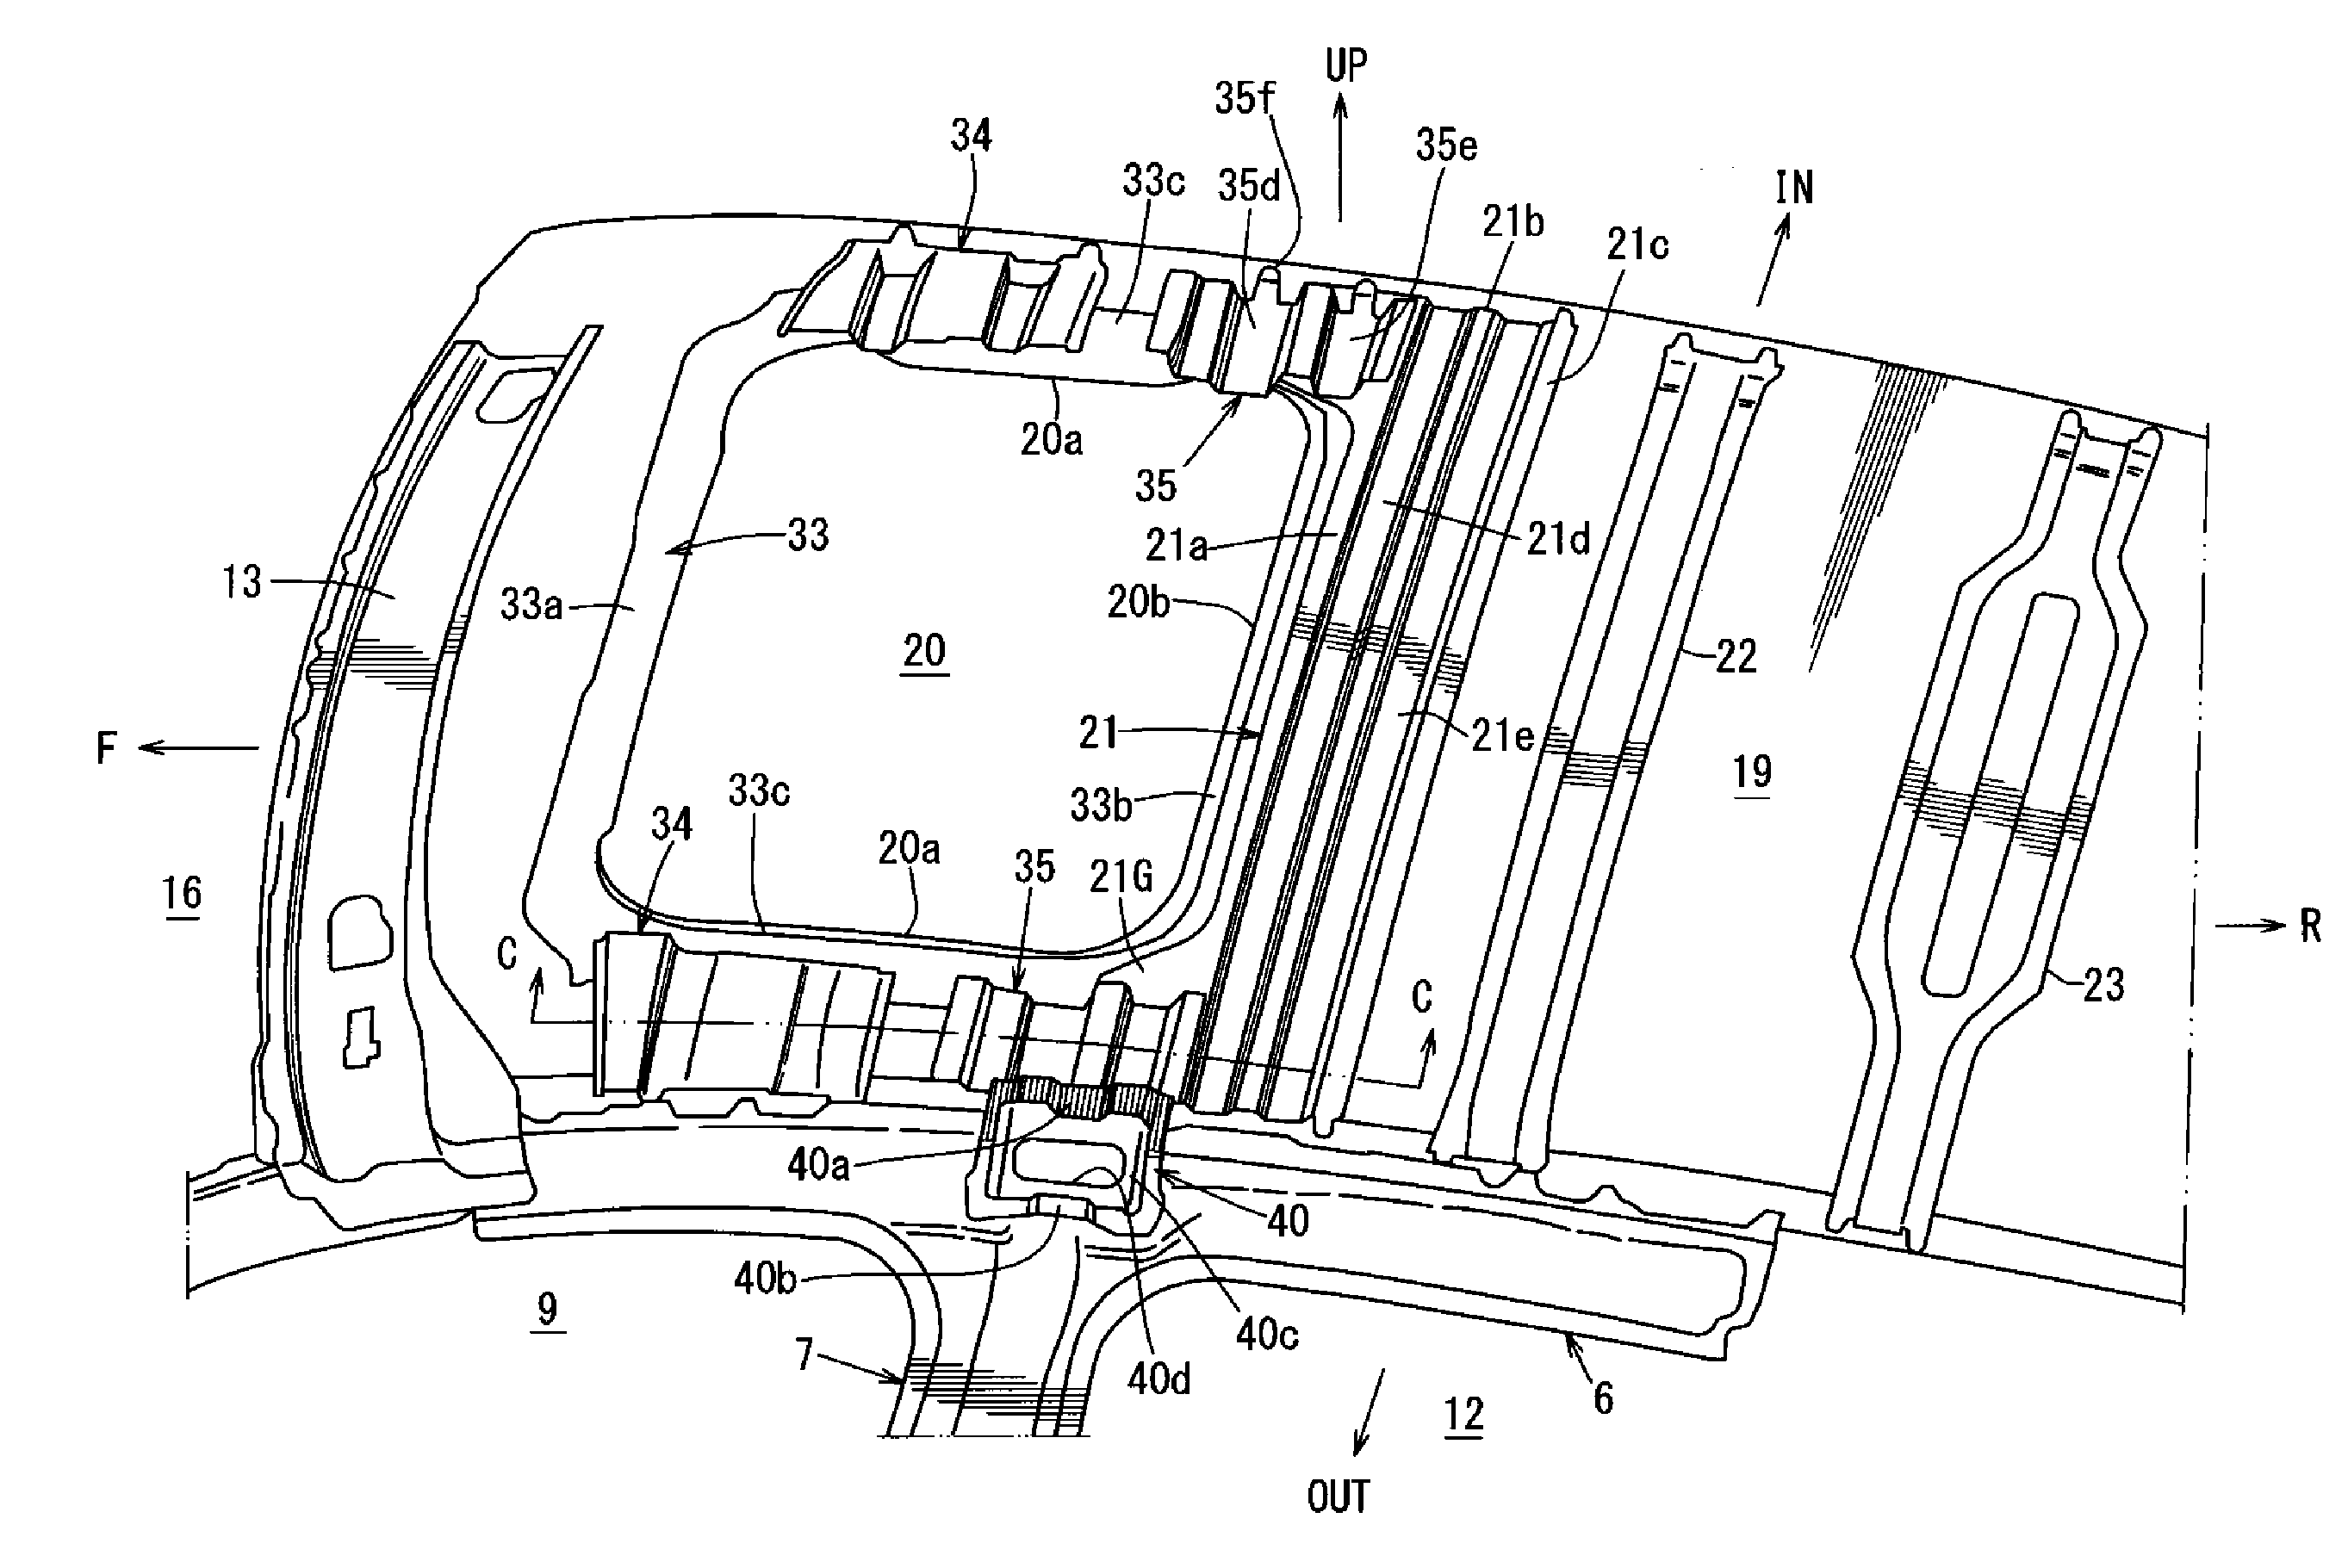 Upper vehicle-body structure of automotive vehicle provided with sun roof